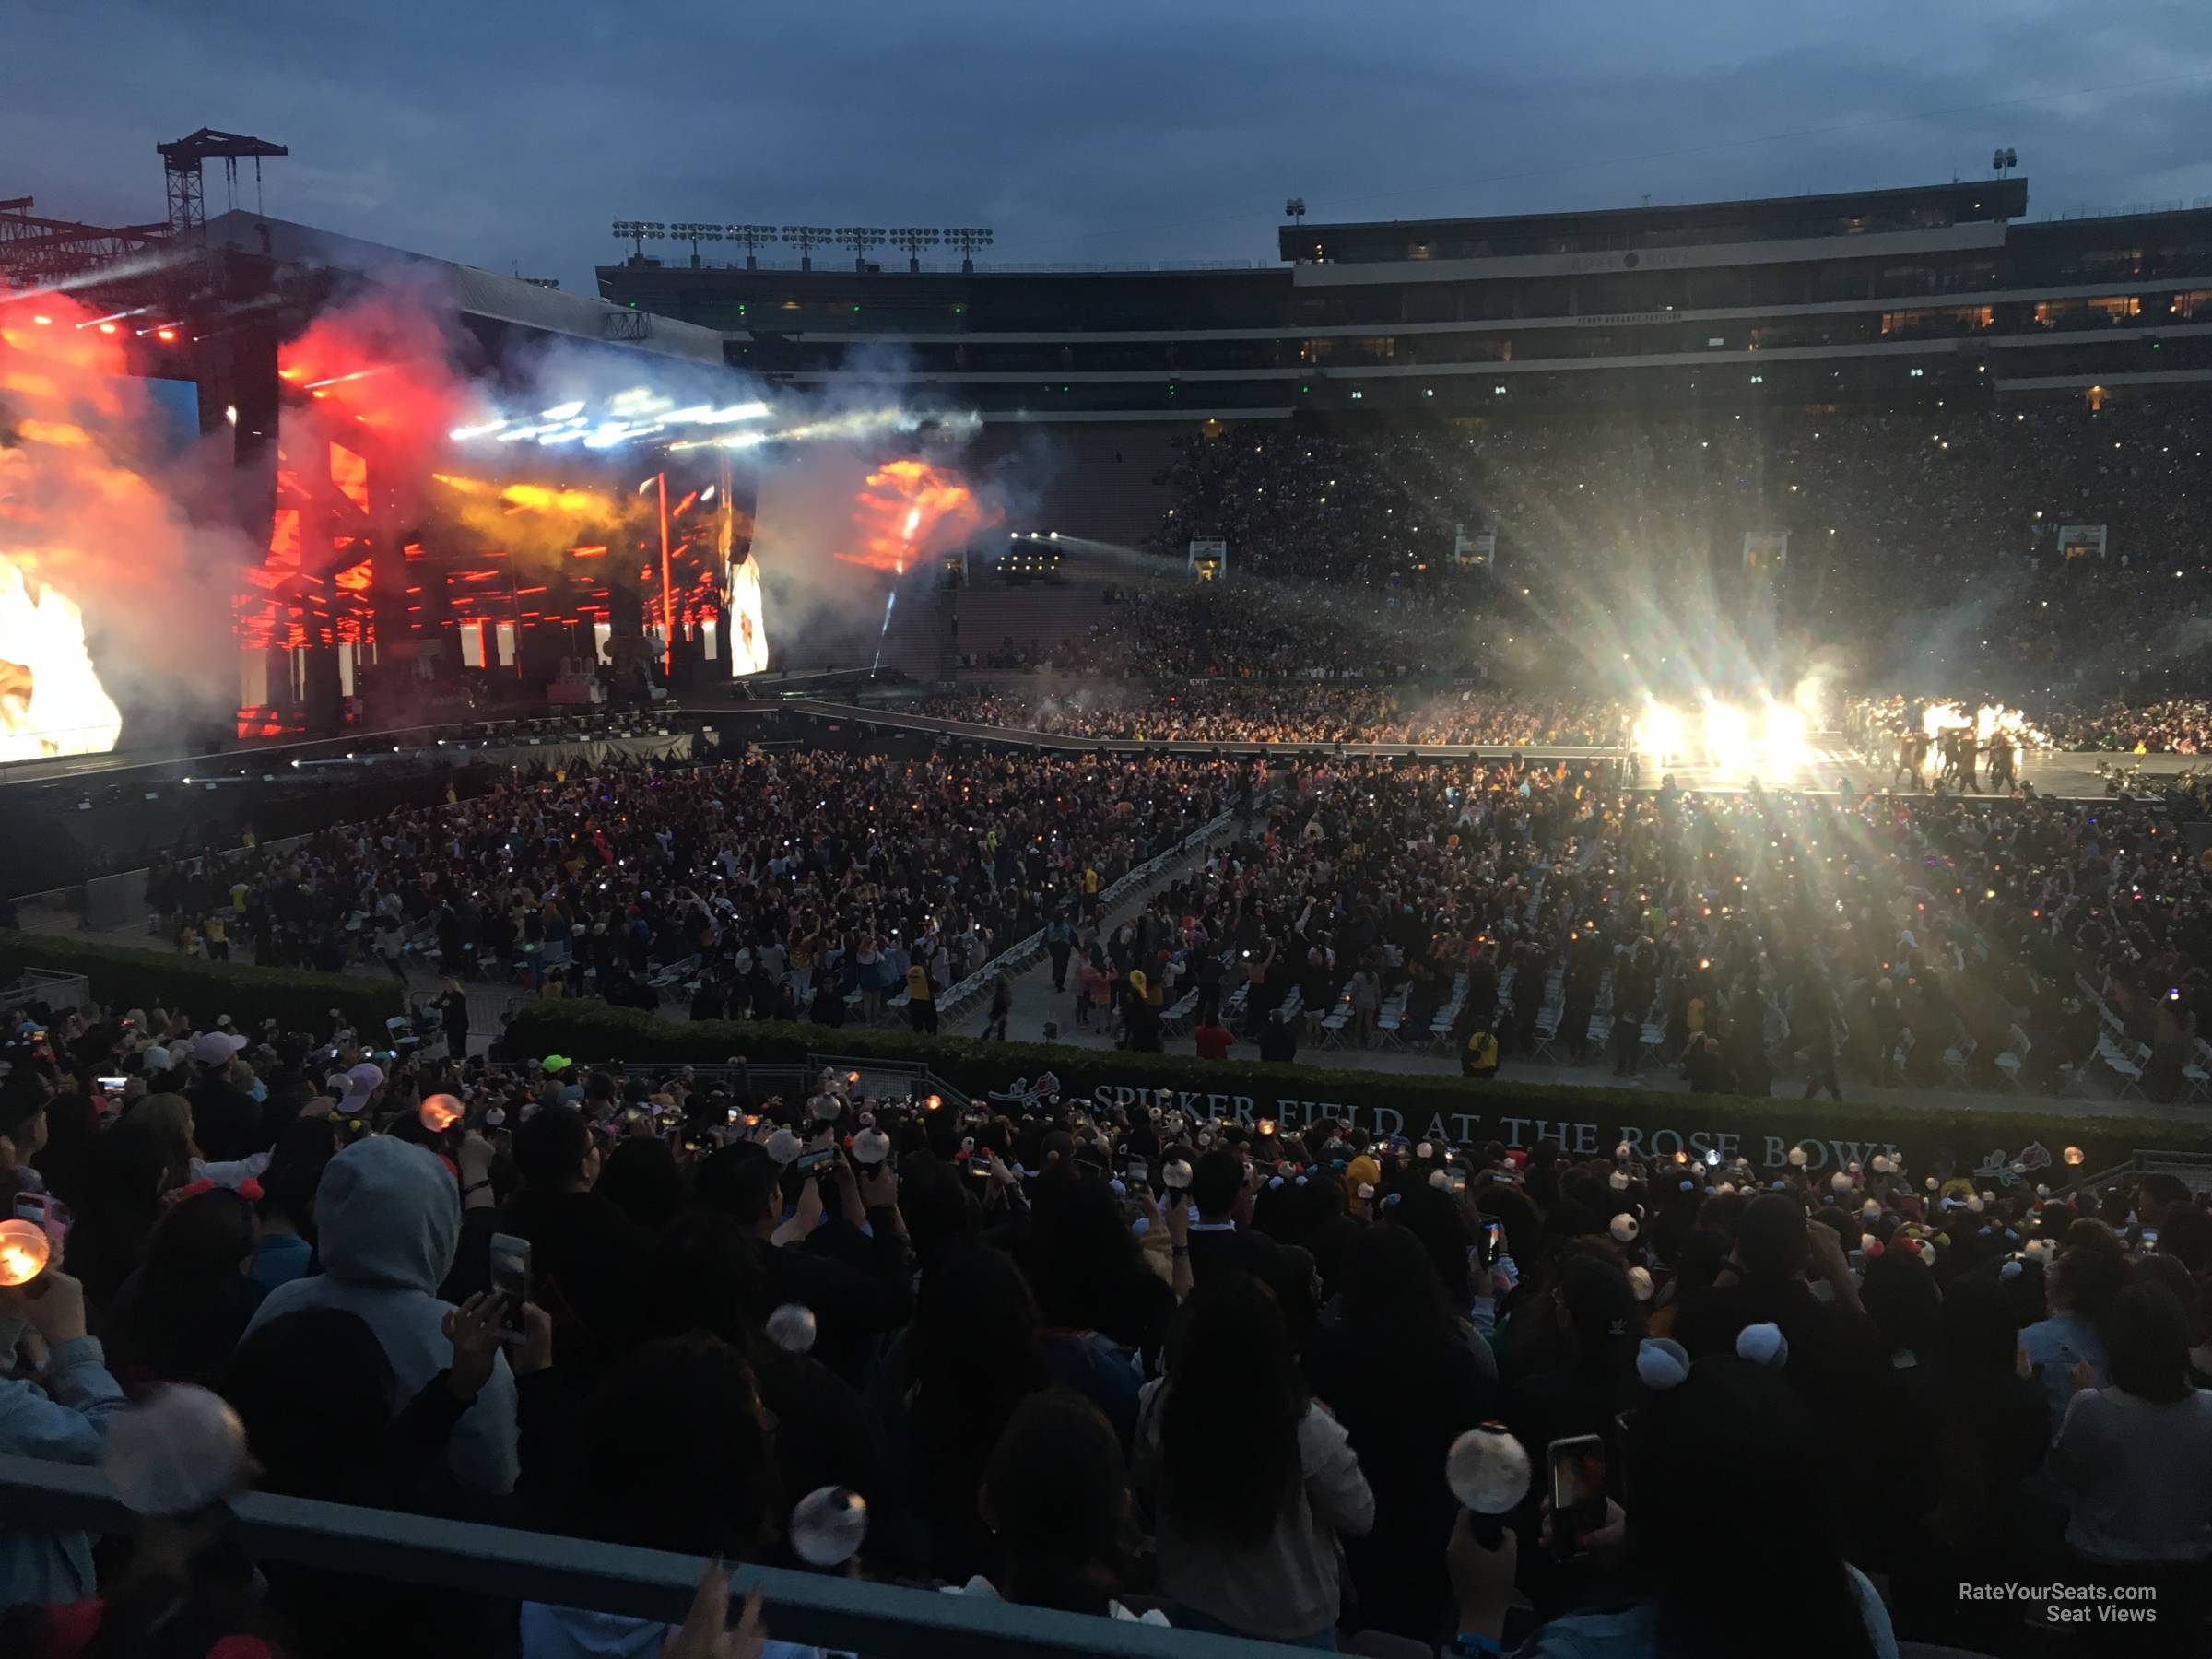 section 5, row 30 seat view  for concert - rose bowl stadium